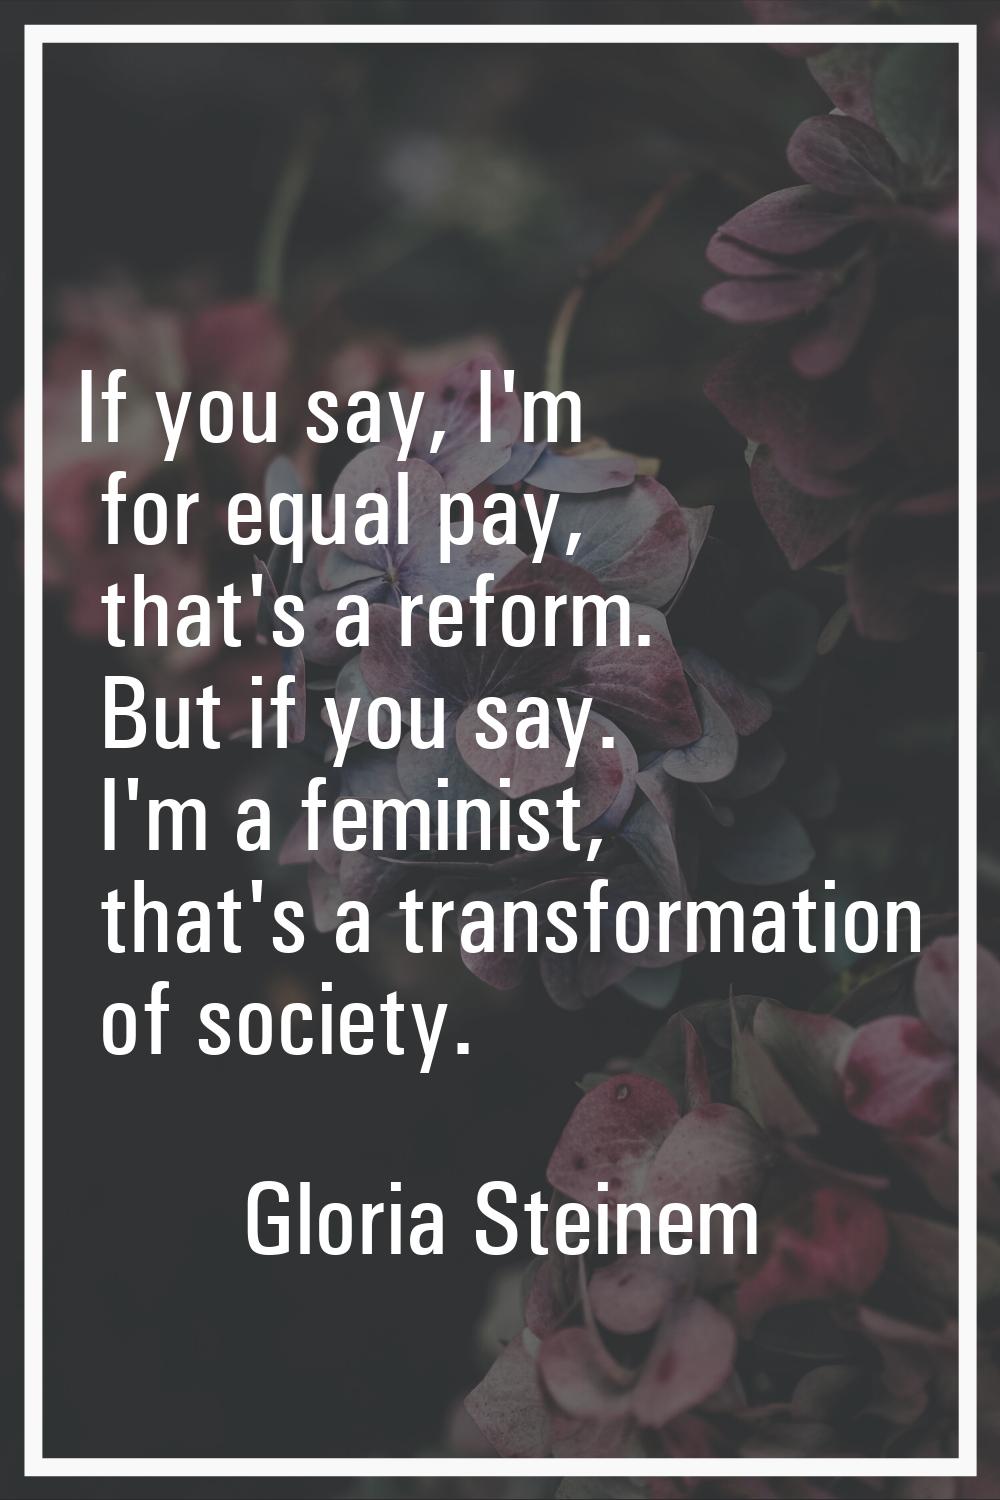 If you say, I'm for equal pay, that's a reform. But if you say. I'm a feminist, that's a transforma